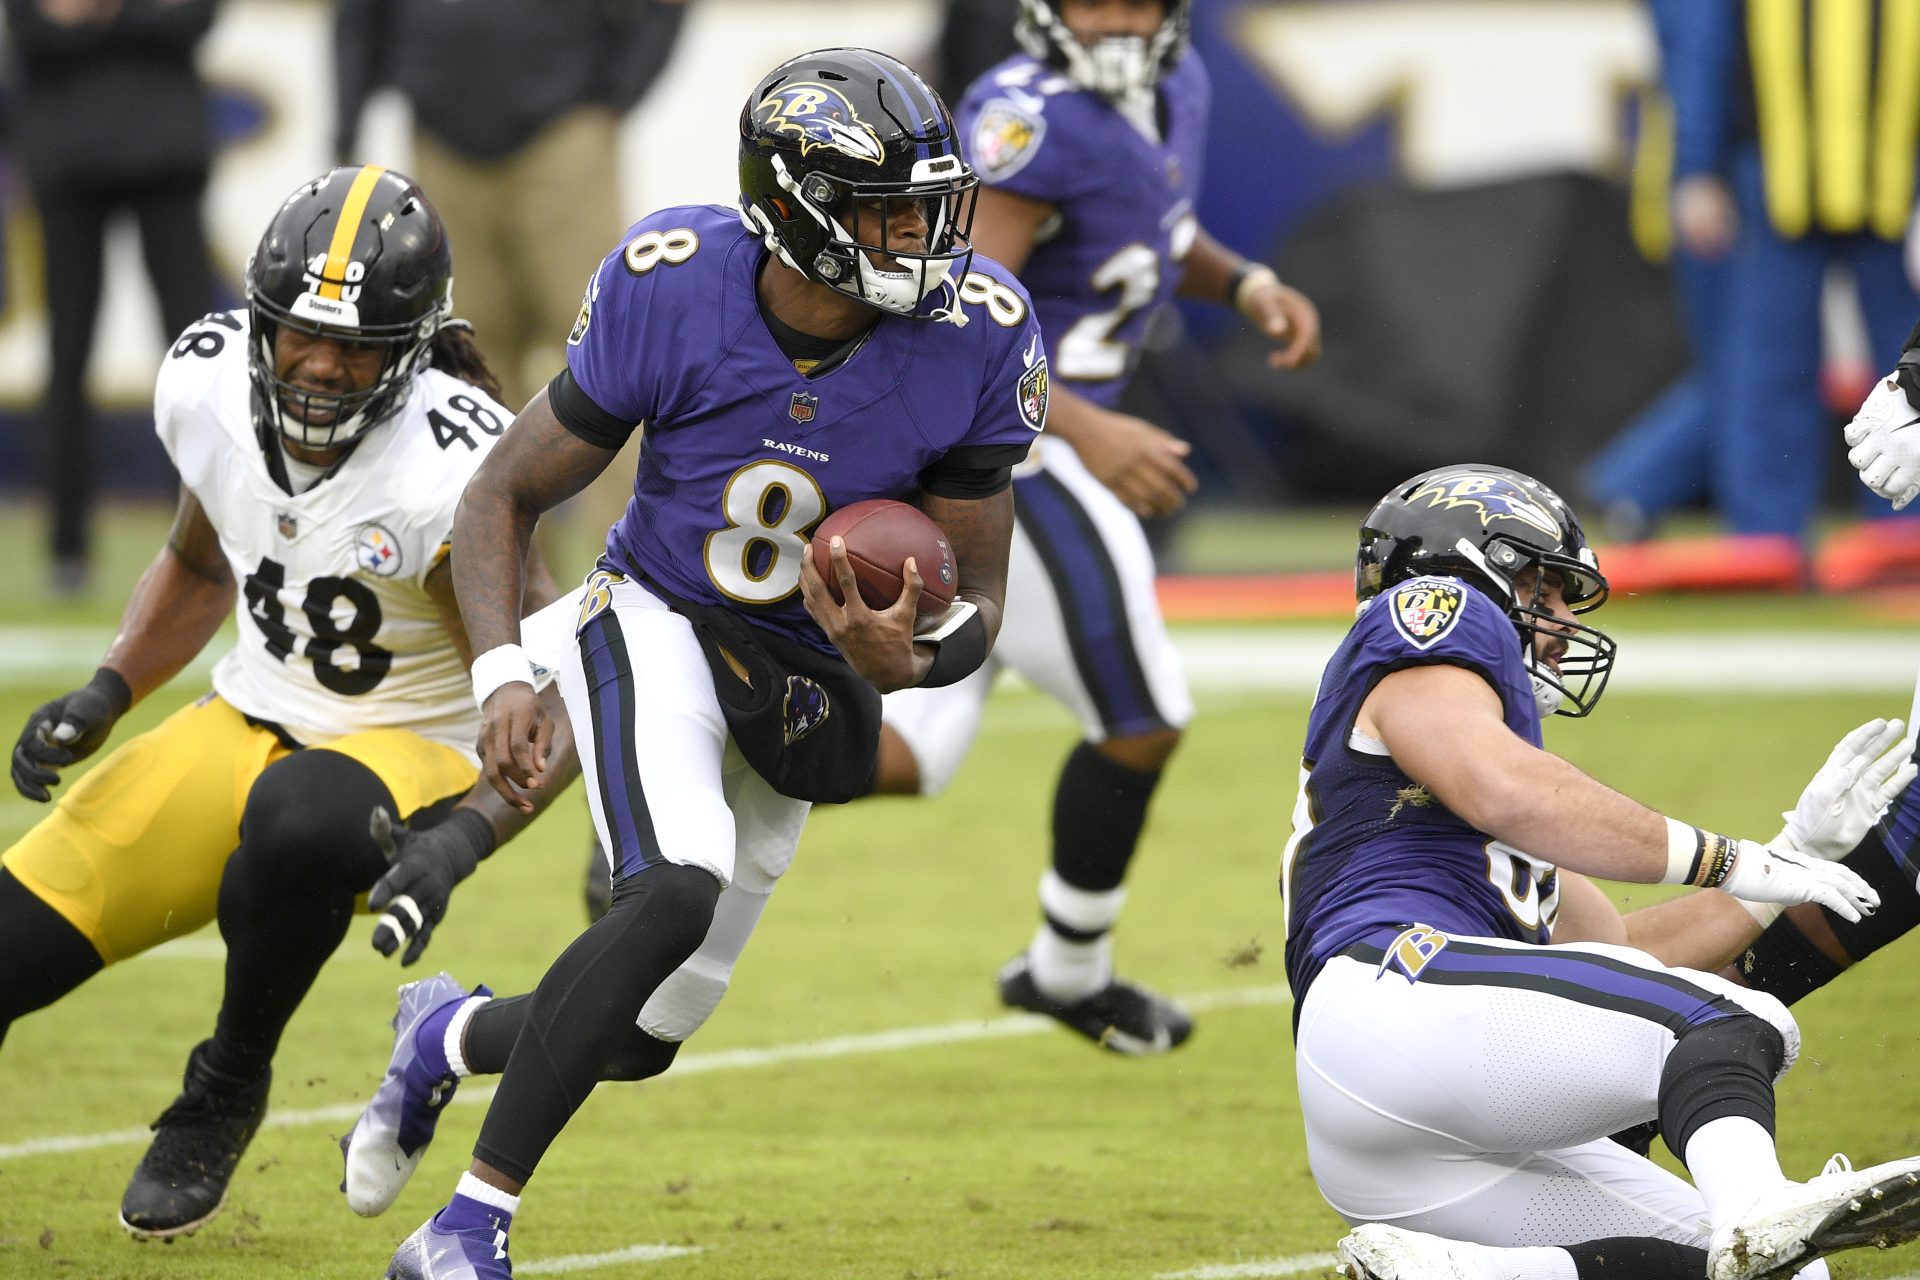 Baltimore Ravens quarterback Lamar Jackson (8) scrambles against the Pittsburgh Steelers during the first half of an NFL football game, Sunday, Nov. 1, 2020, in Baltimore.